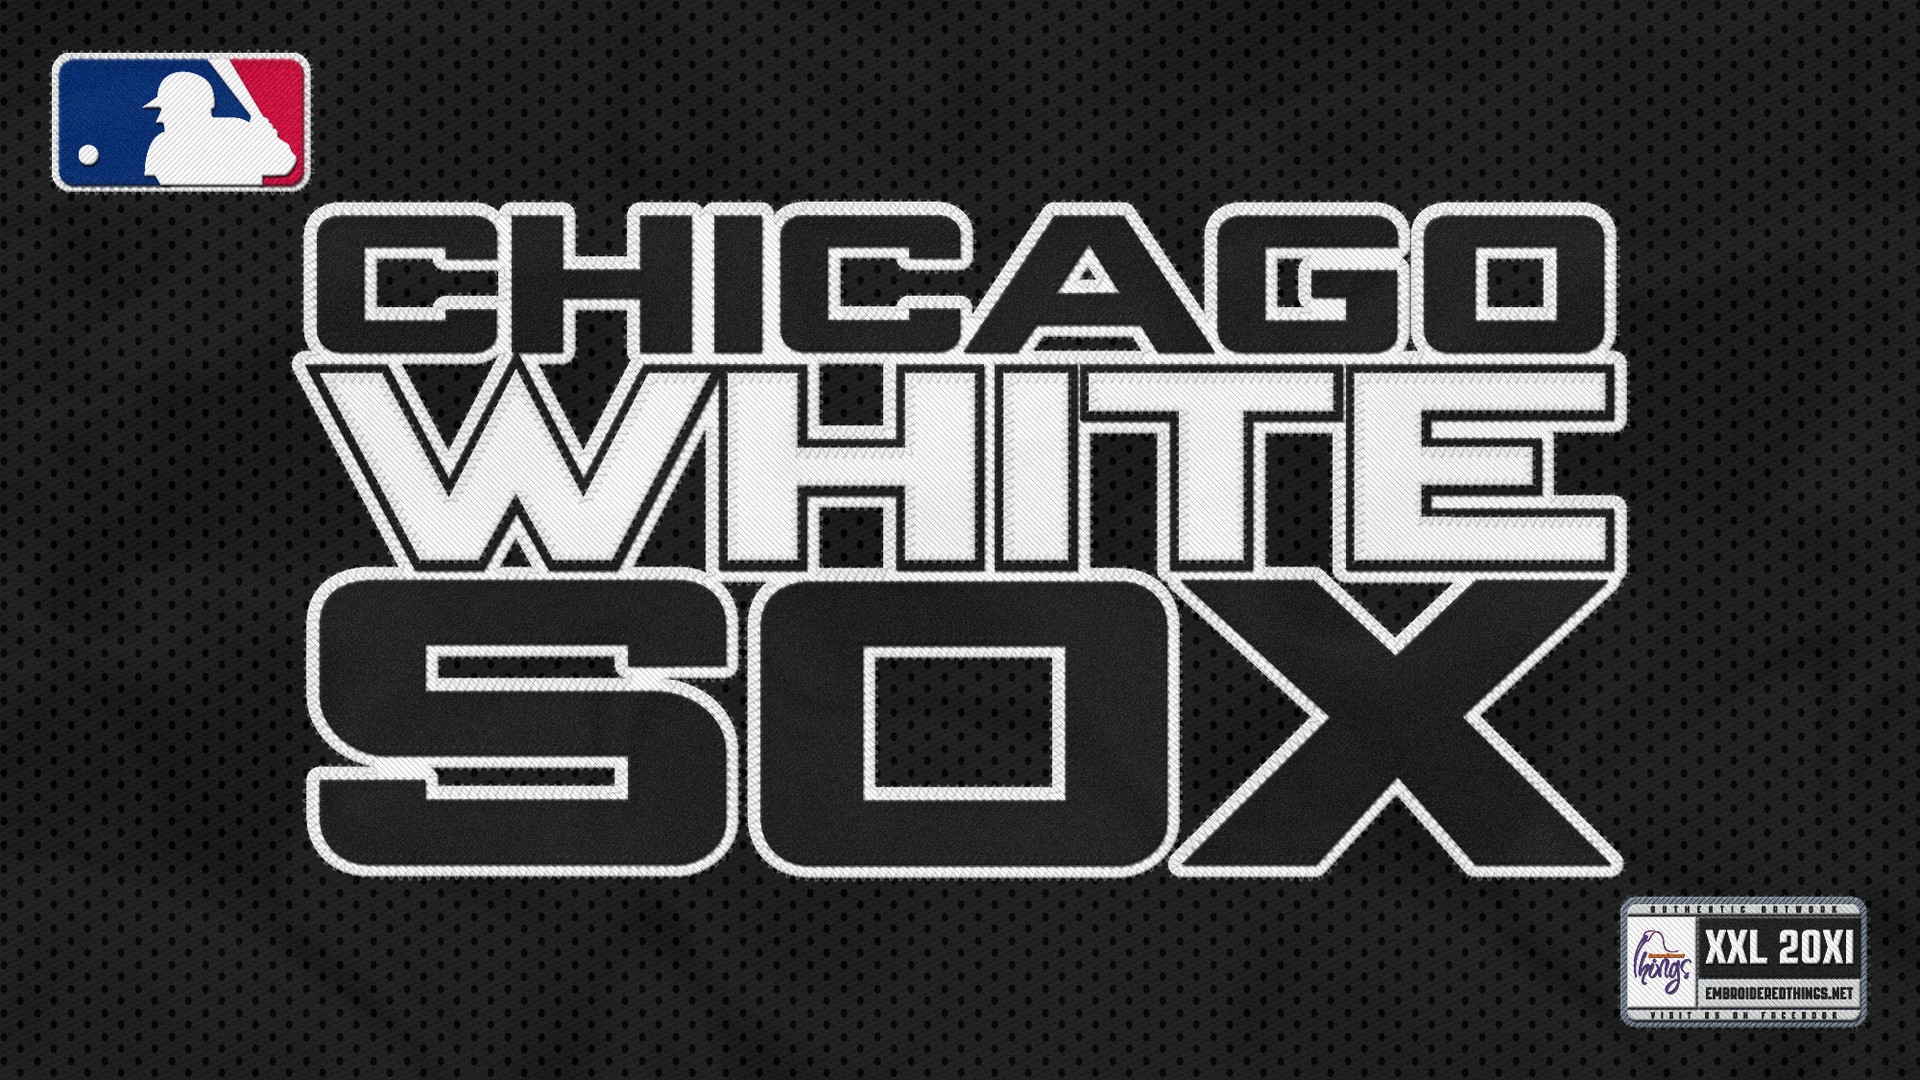 2 Chicago White Sox HD Wallpapers Backgrounds - Wallpaper Abyss